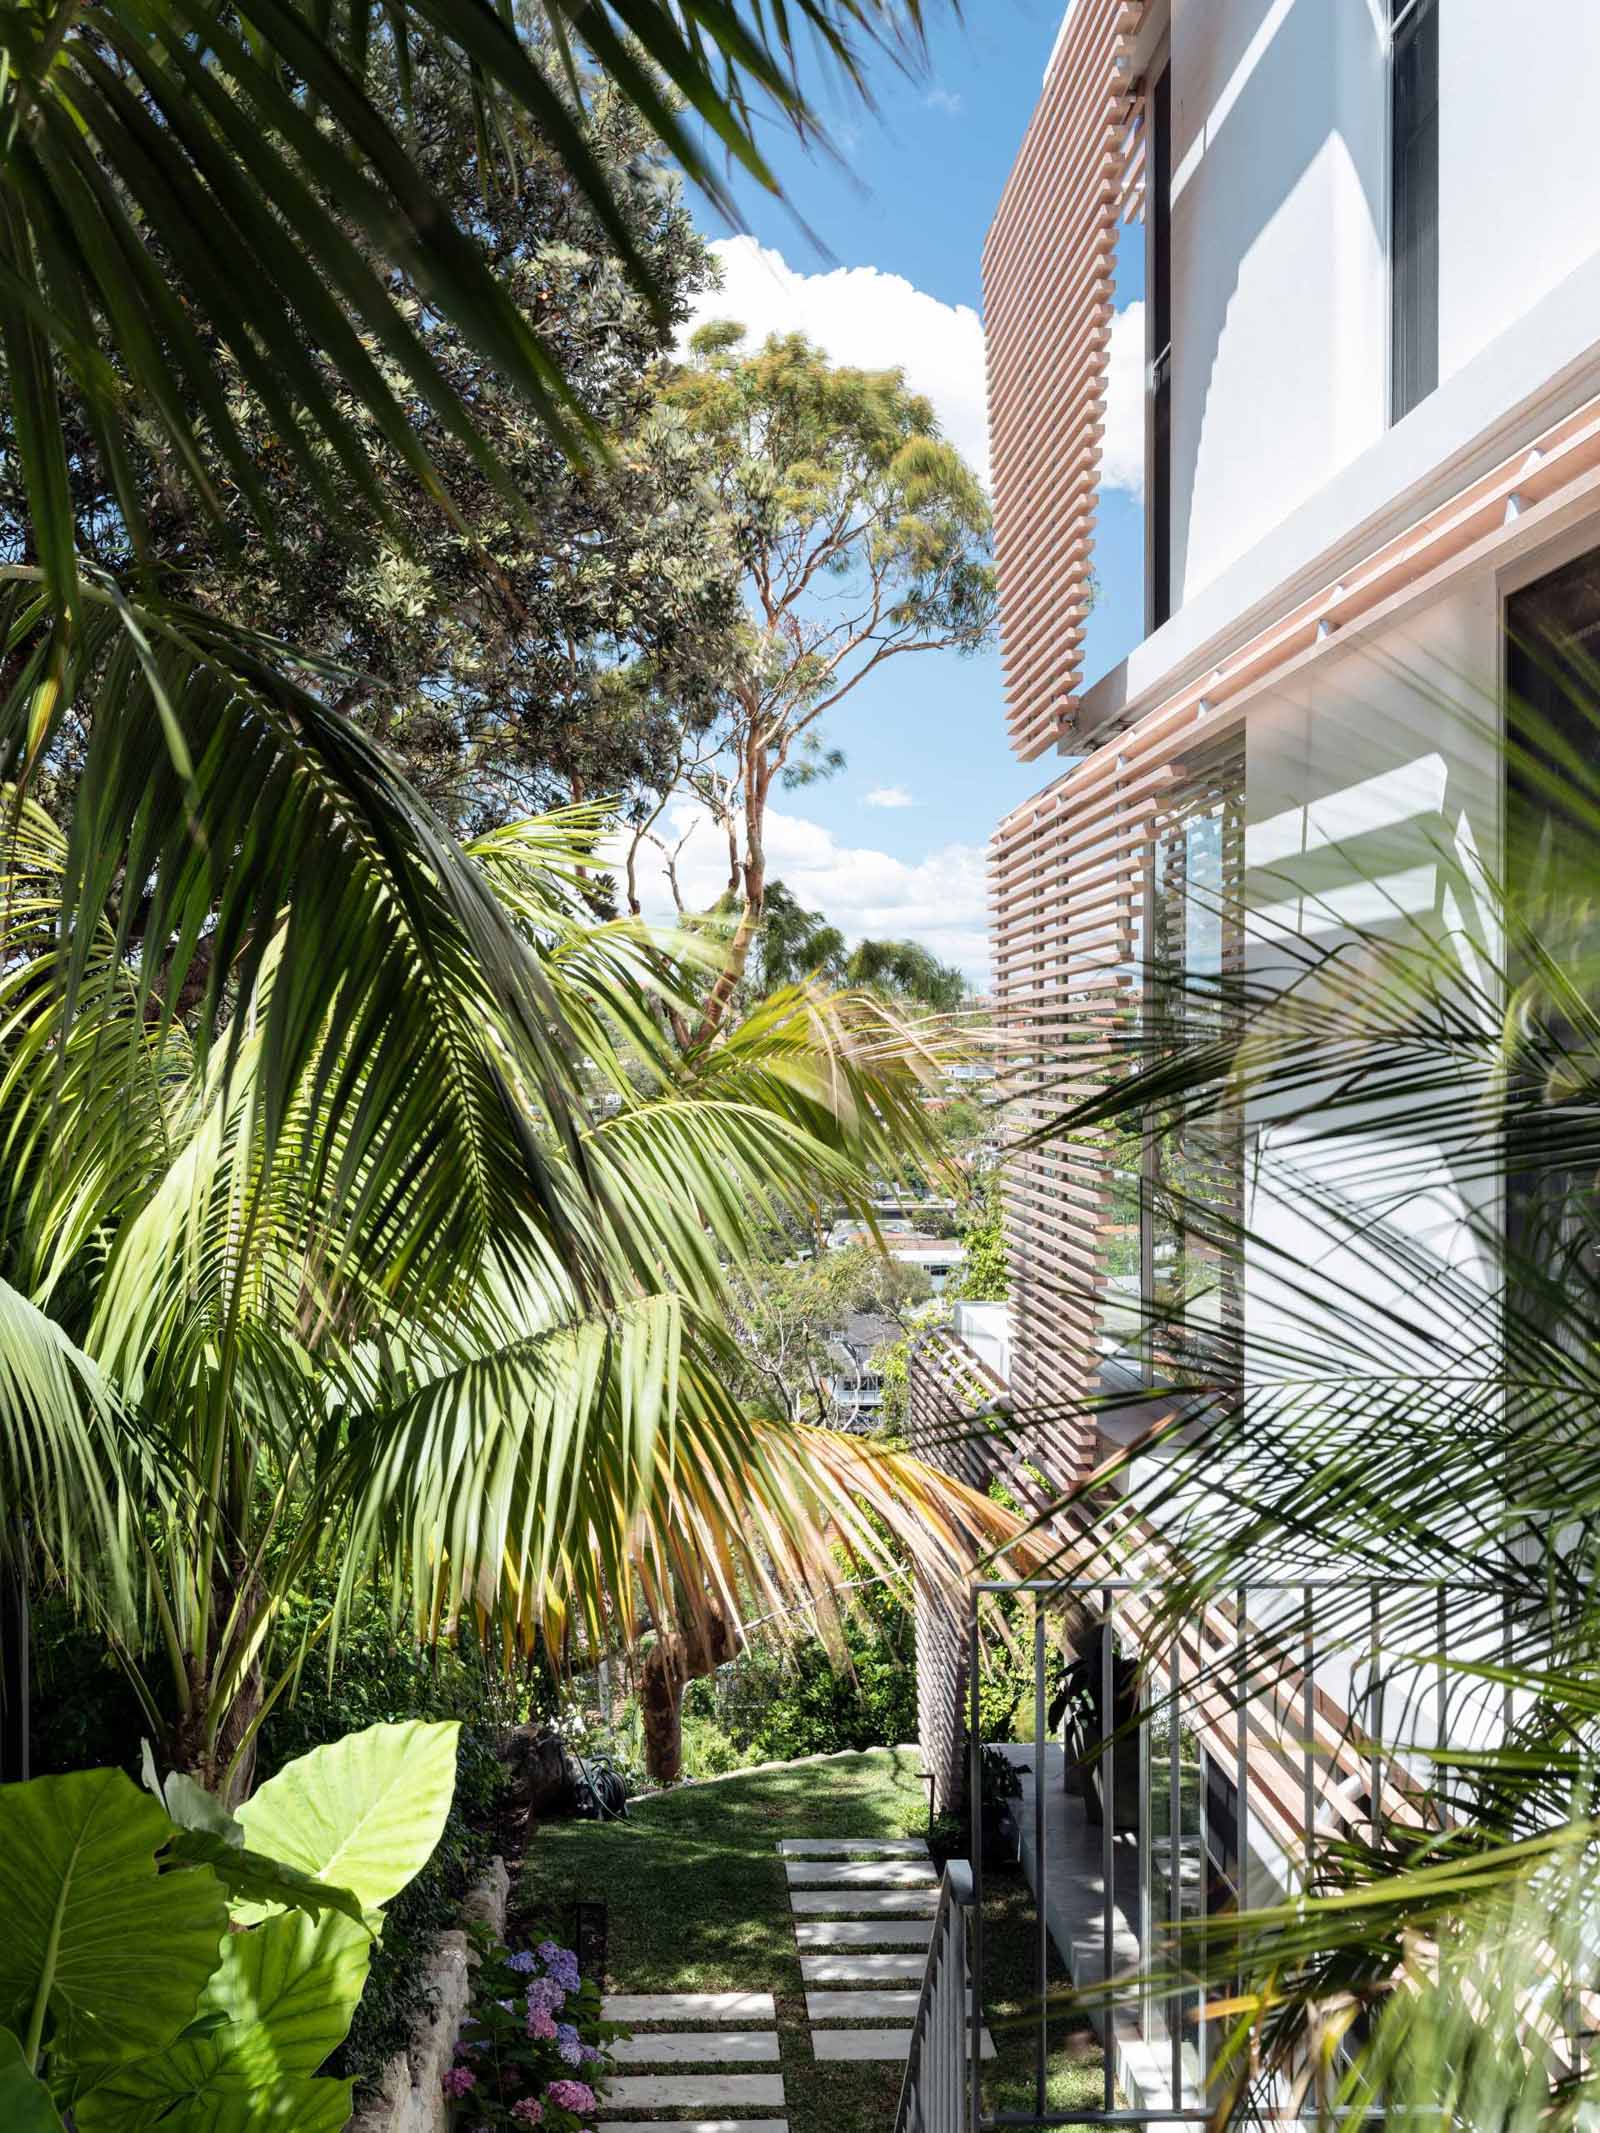 The slatted screens have a subtle woodgrain that adds texture and warmth to the facade of this modern house.